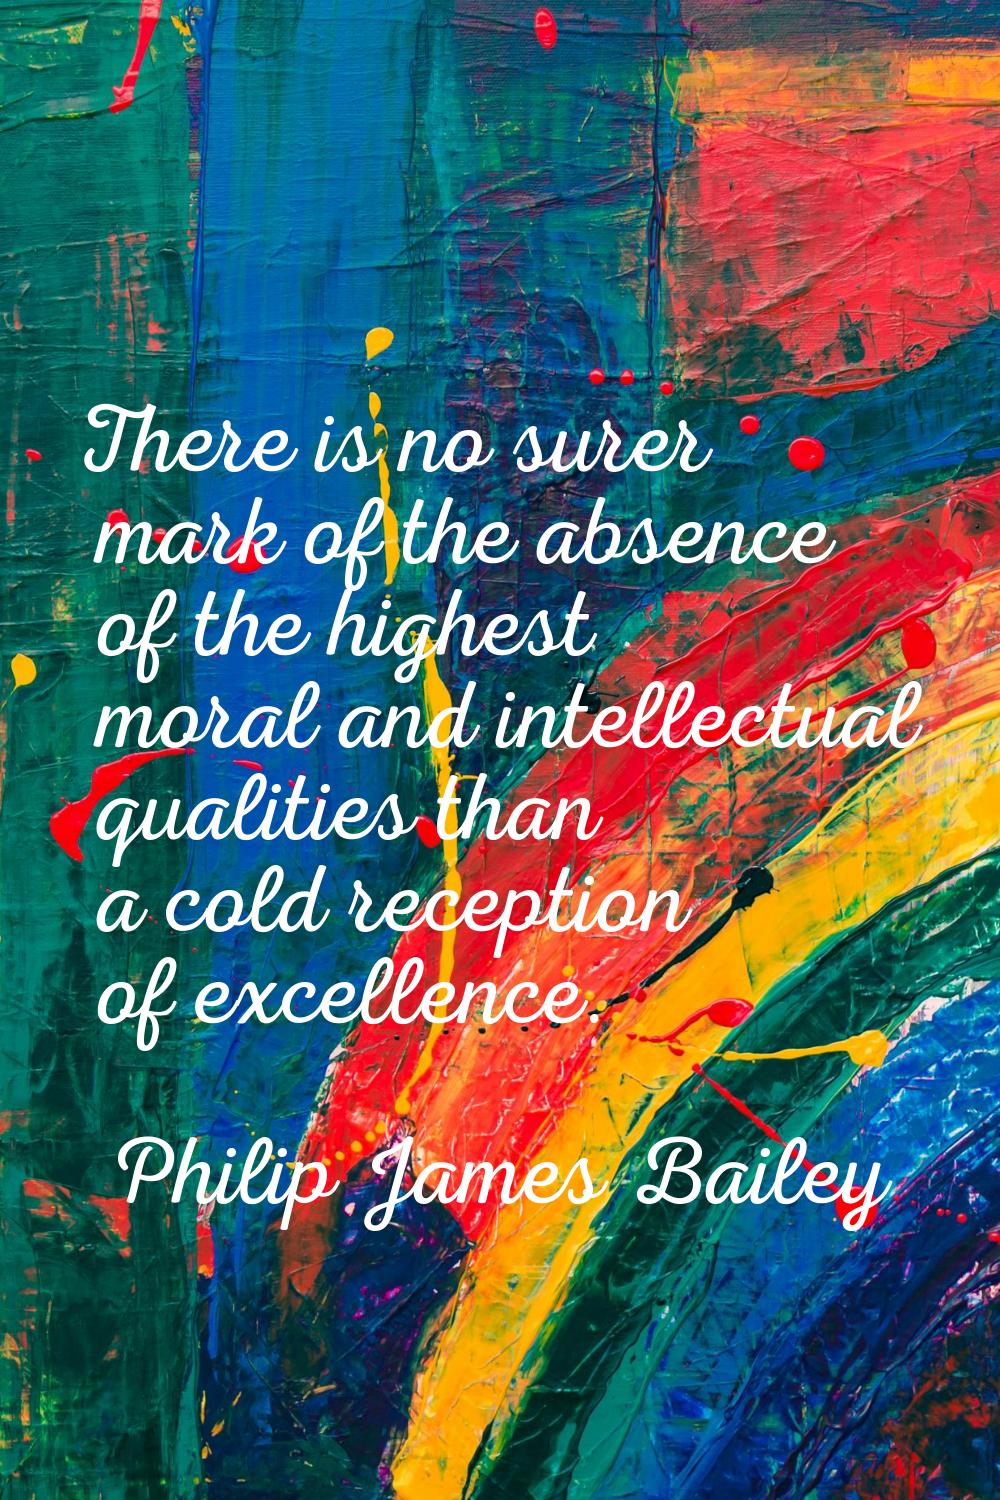 There is no surer mark of the absence of the highest moral and intellectual qualities than a cold r